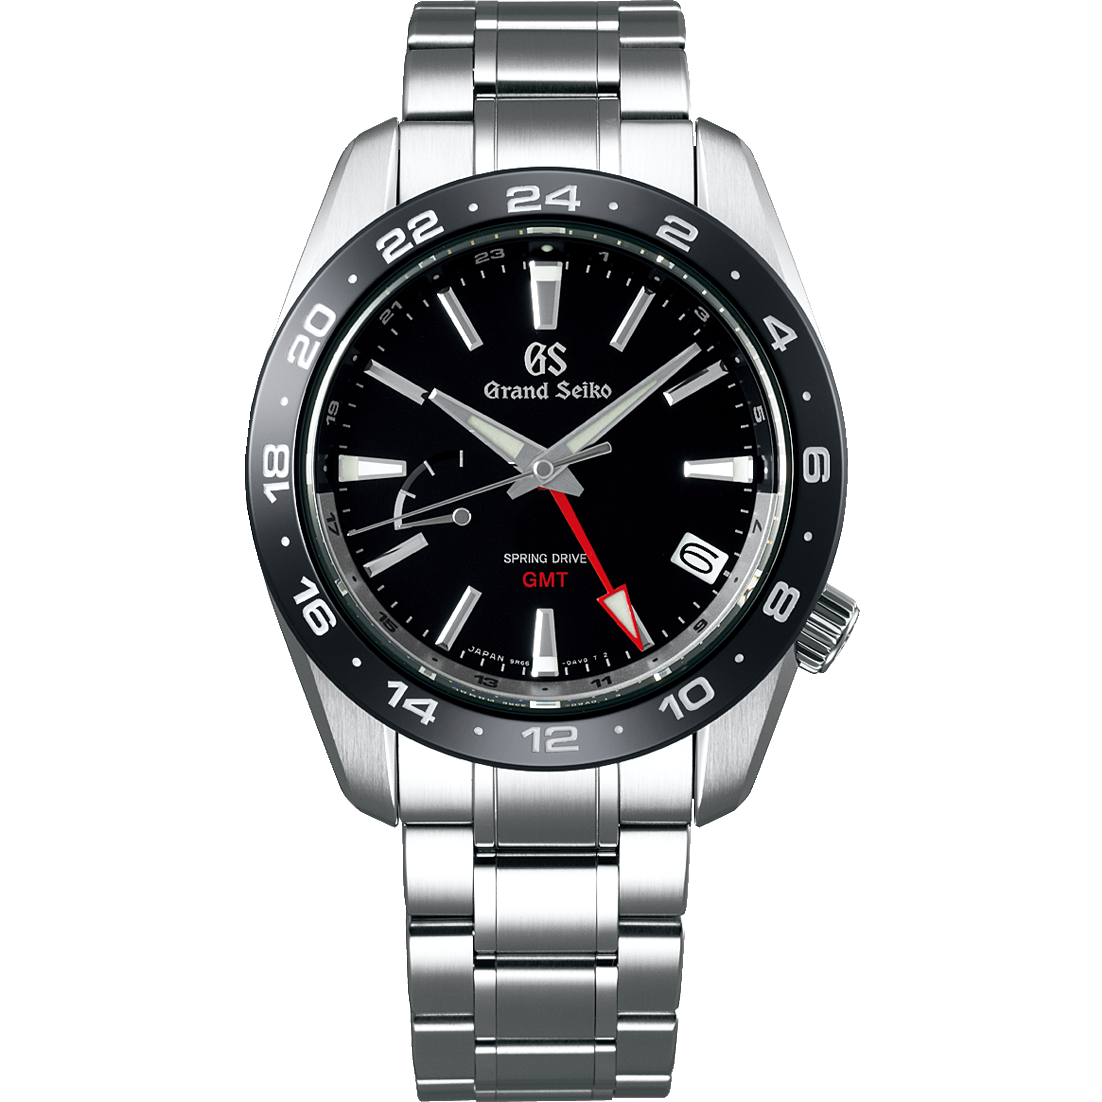 Grand Seiko SBGE253 Spring Drive GMT black dial stainless steel ceramic men's watches